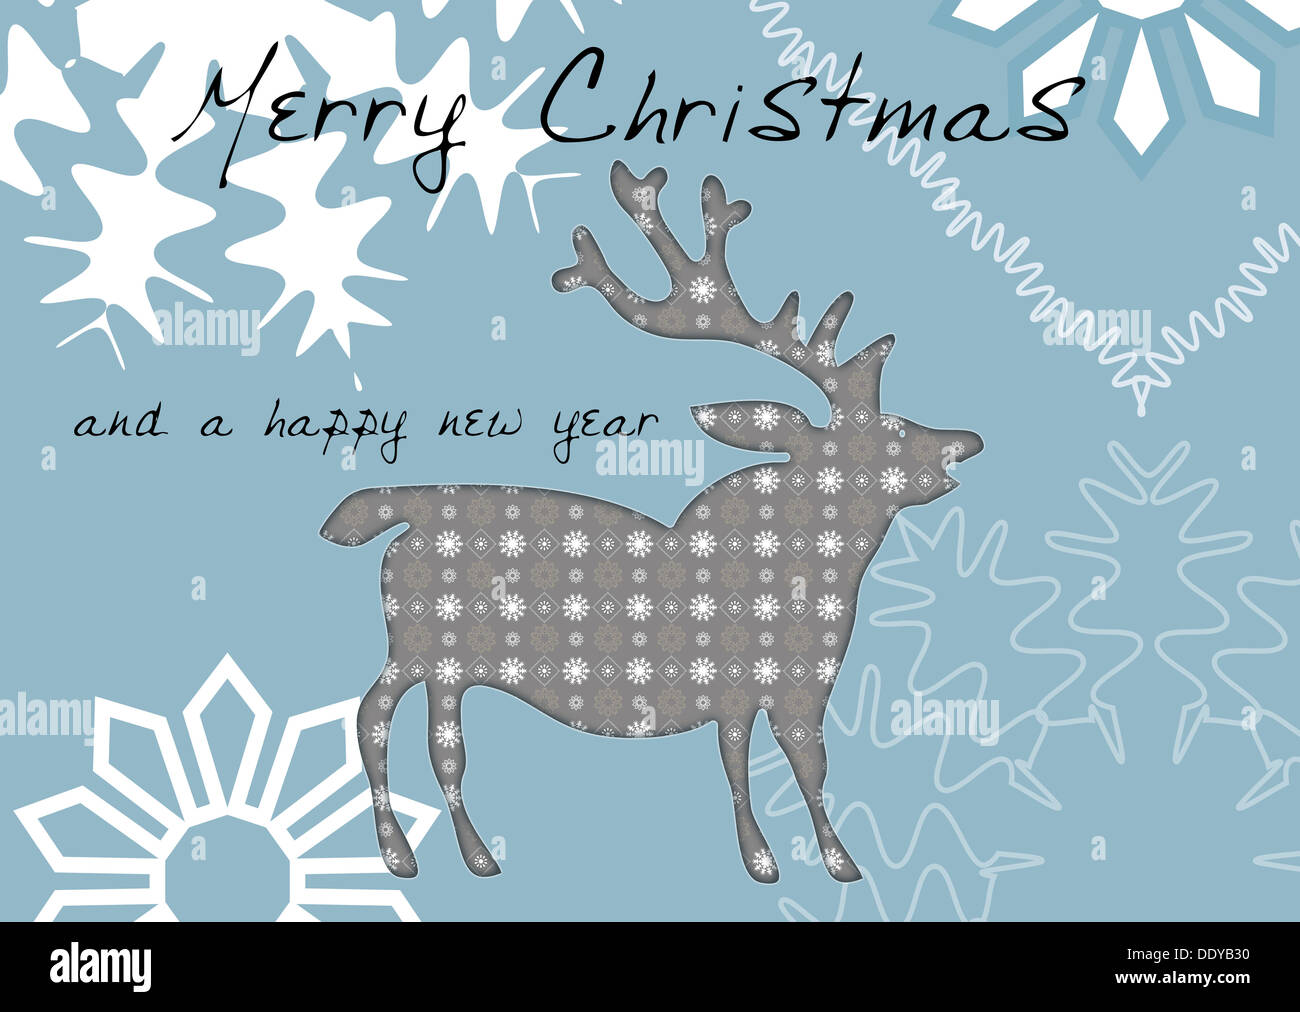 Christmas card 'Merry Christmas and a Happy New Year', stag or hart, illustration Stock Photo